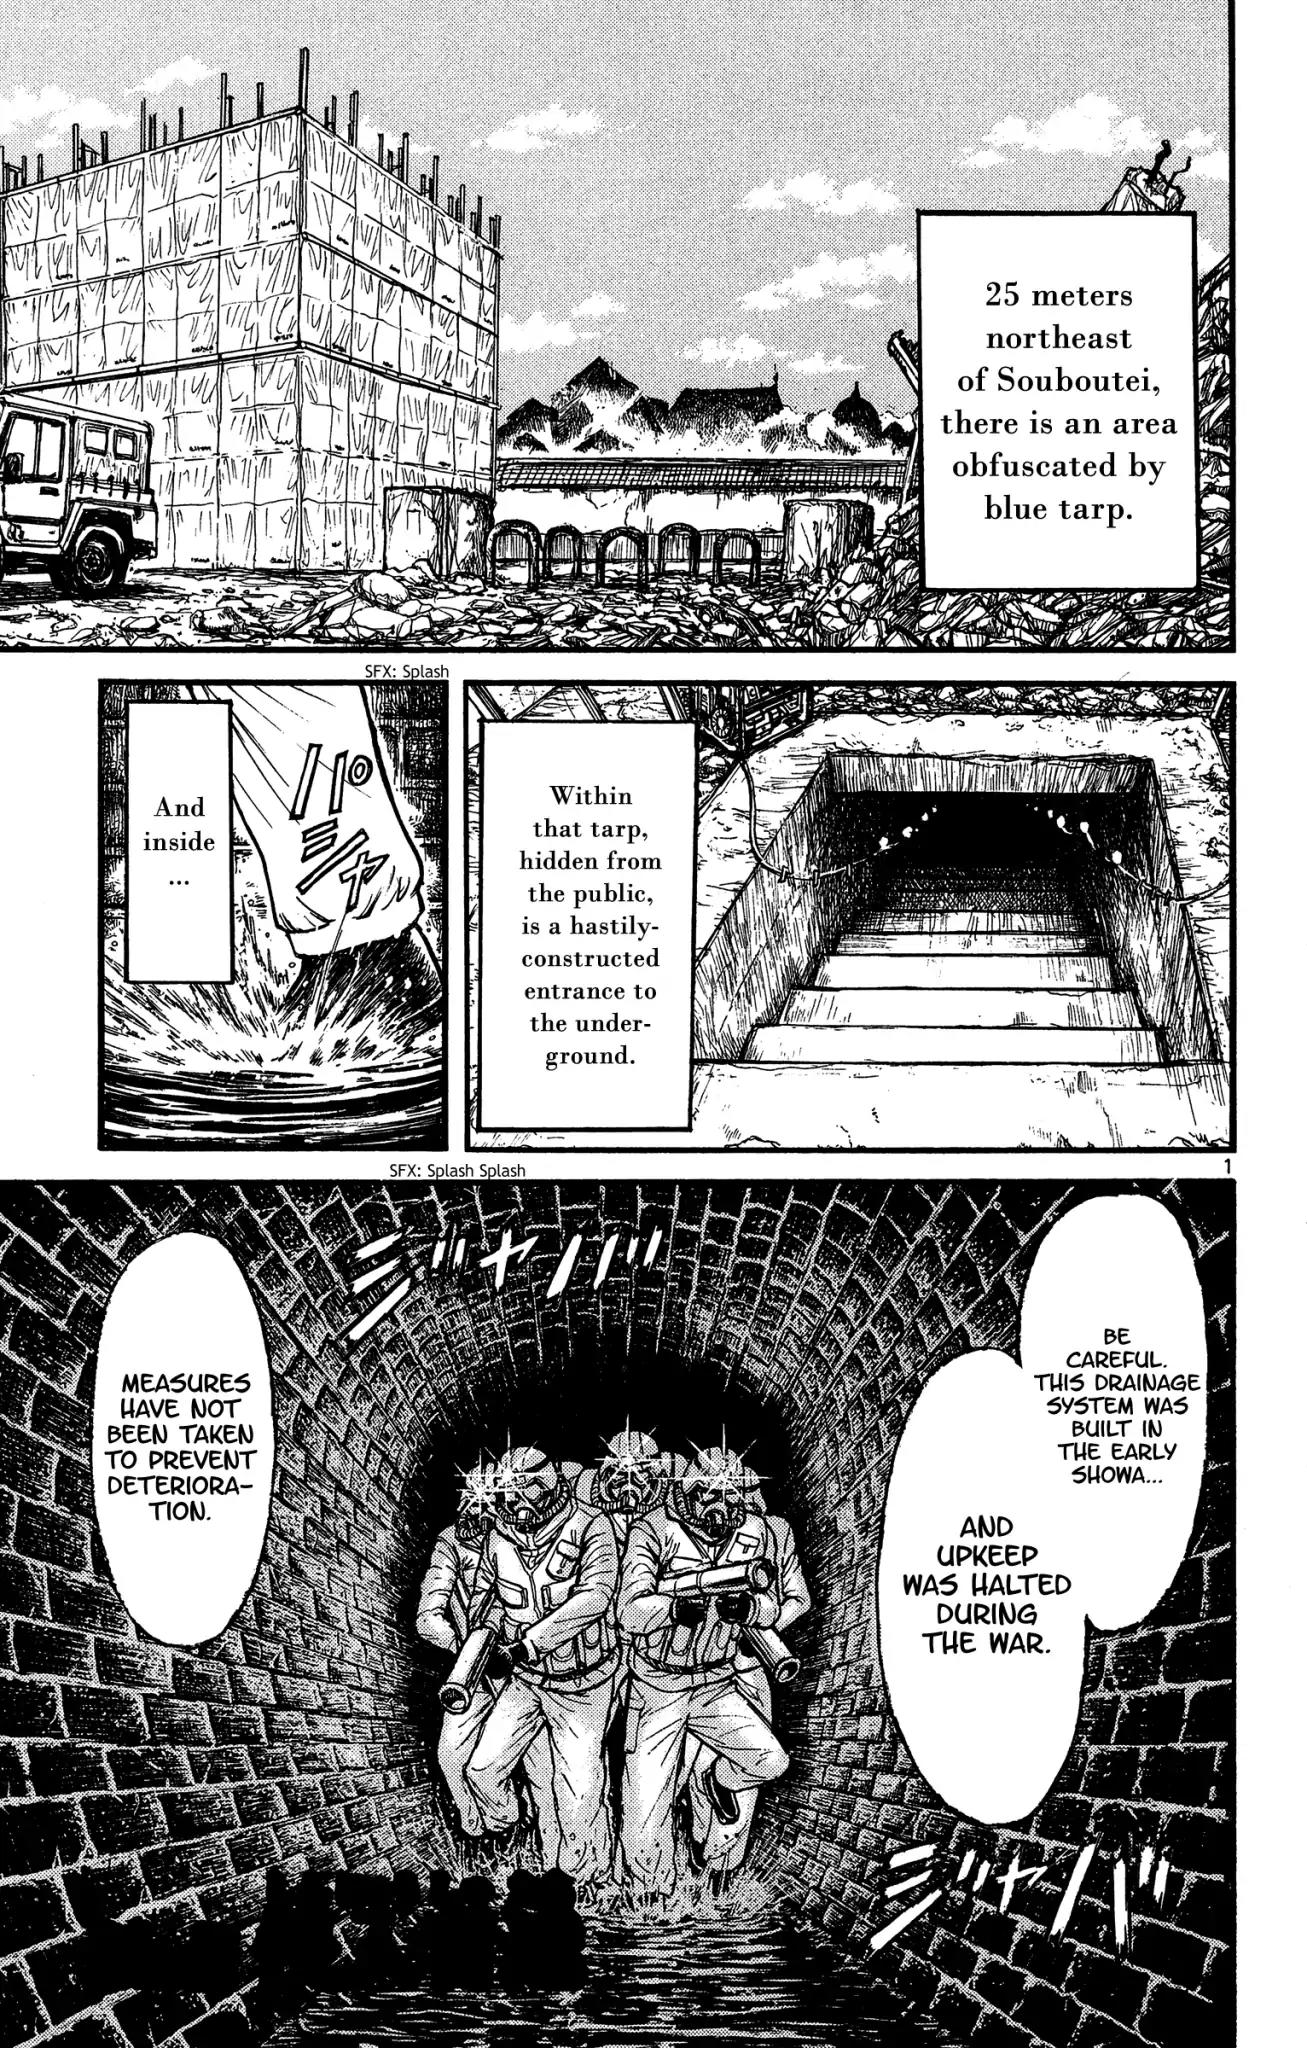 Souboutei Must Be Destroyed Chapter 134: